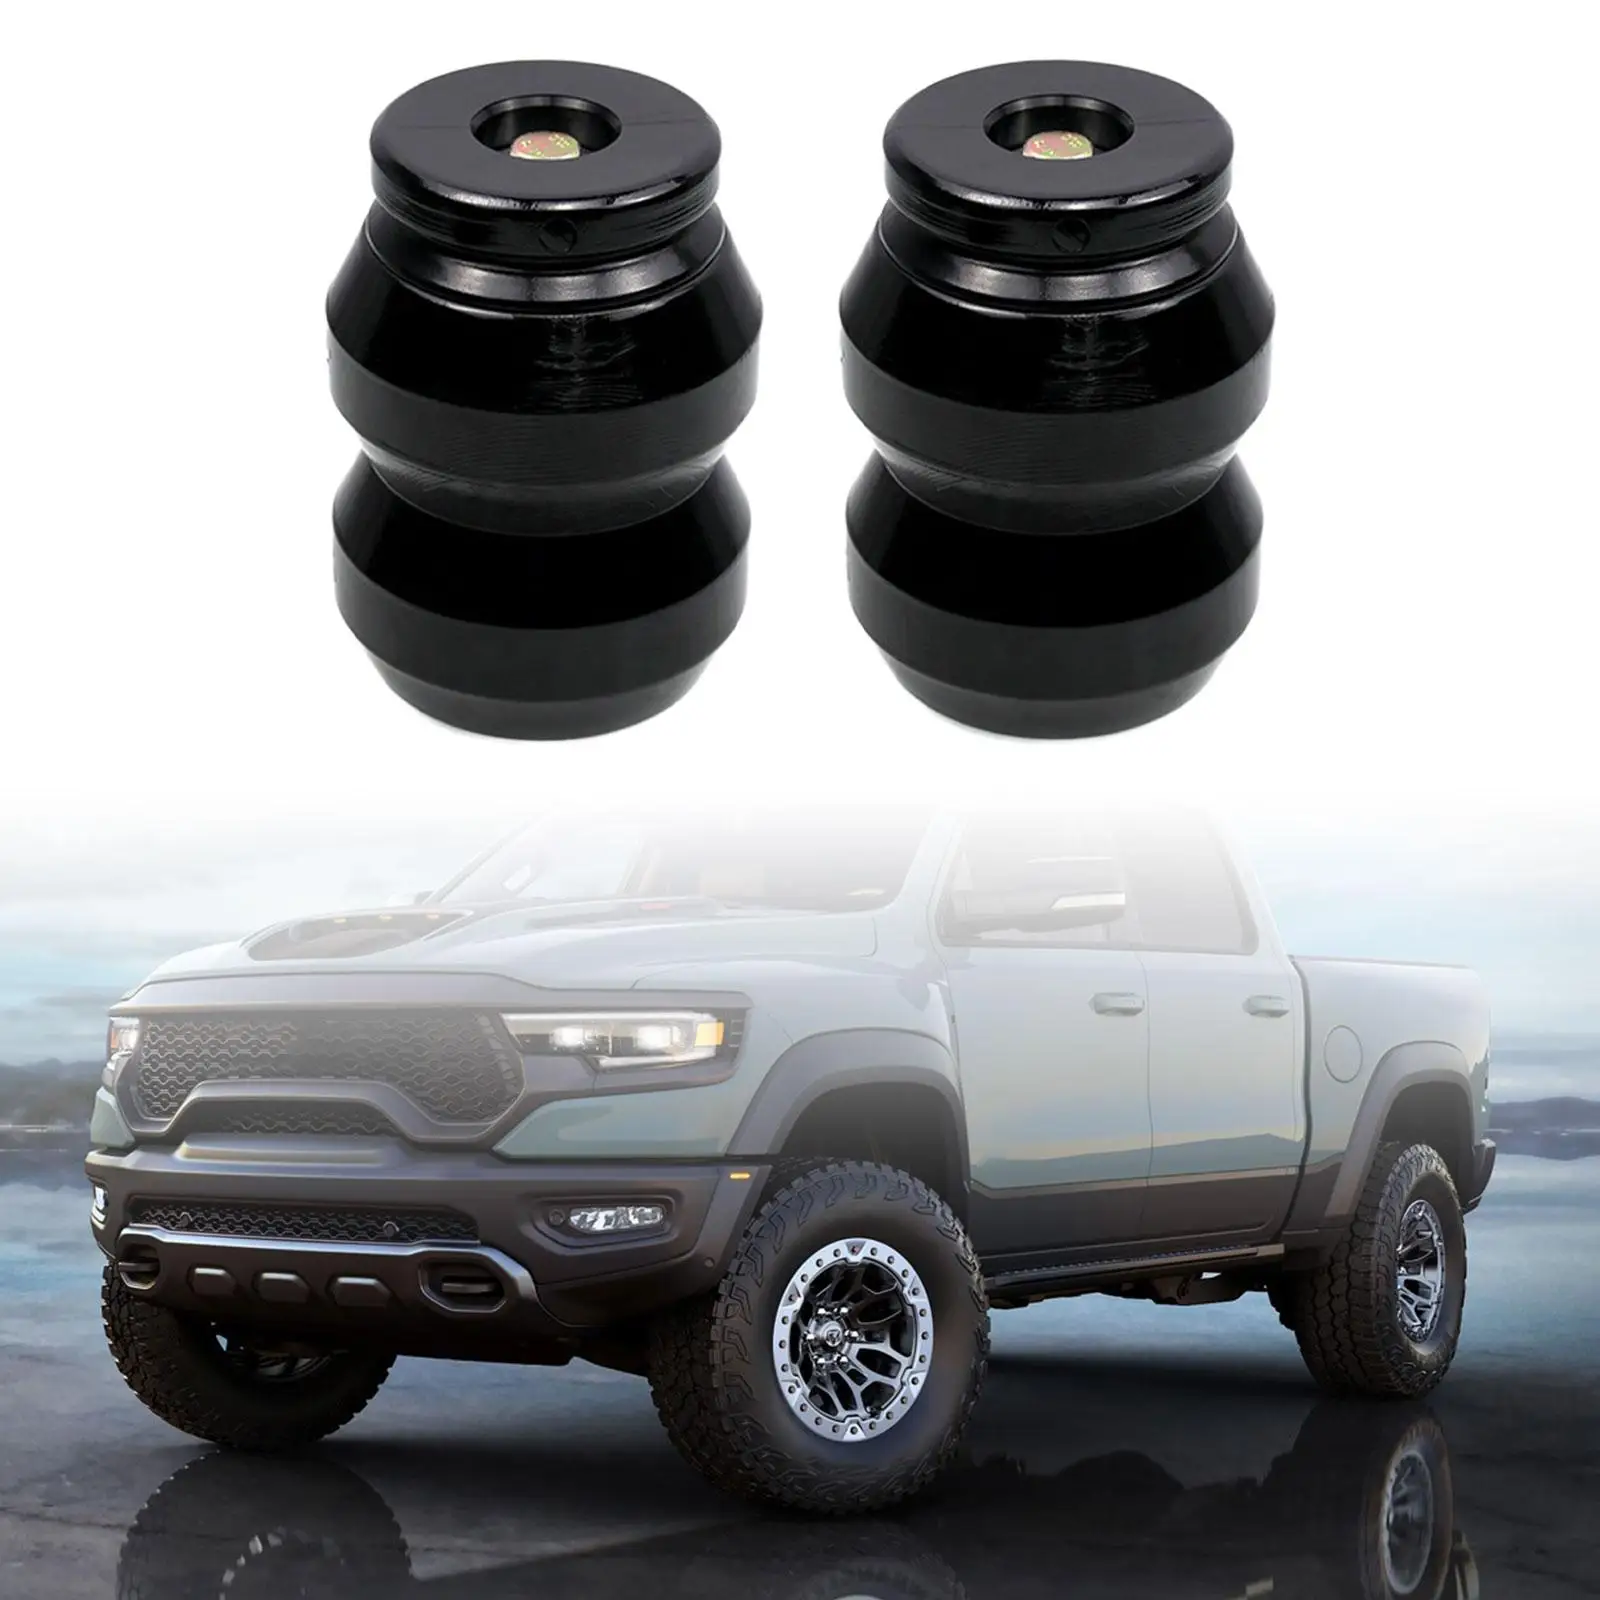 2 Pieces Suspension Enhancement System DR1500dq Durable Easy Installation for Dodge RAM 1500 2WD 4WD 2009-2021 Accessory